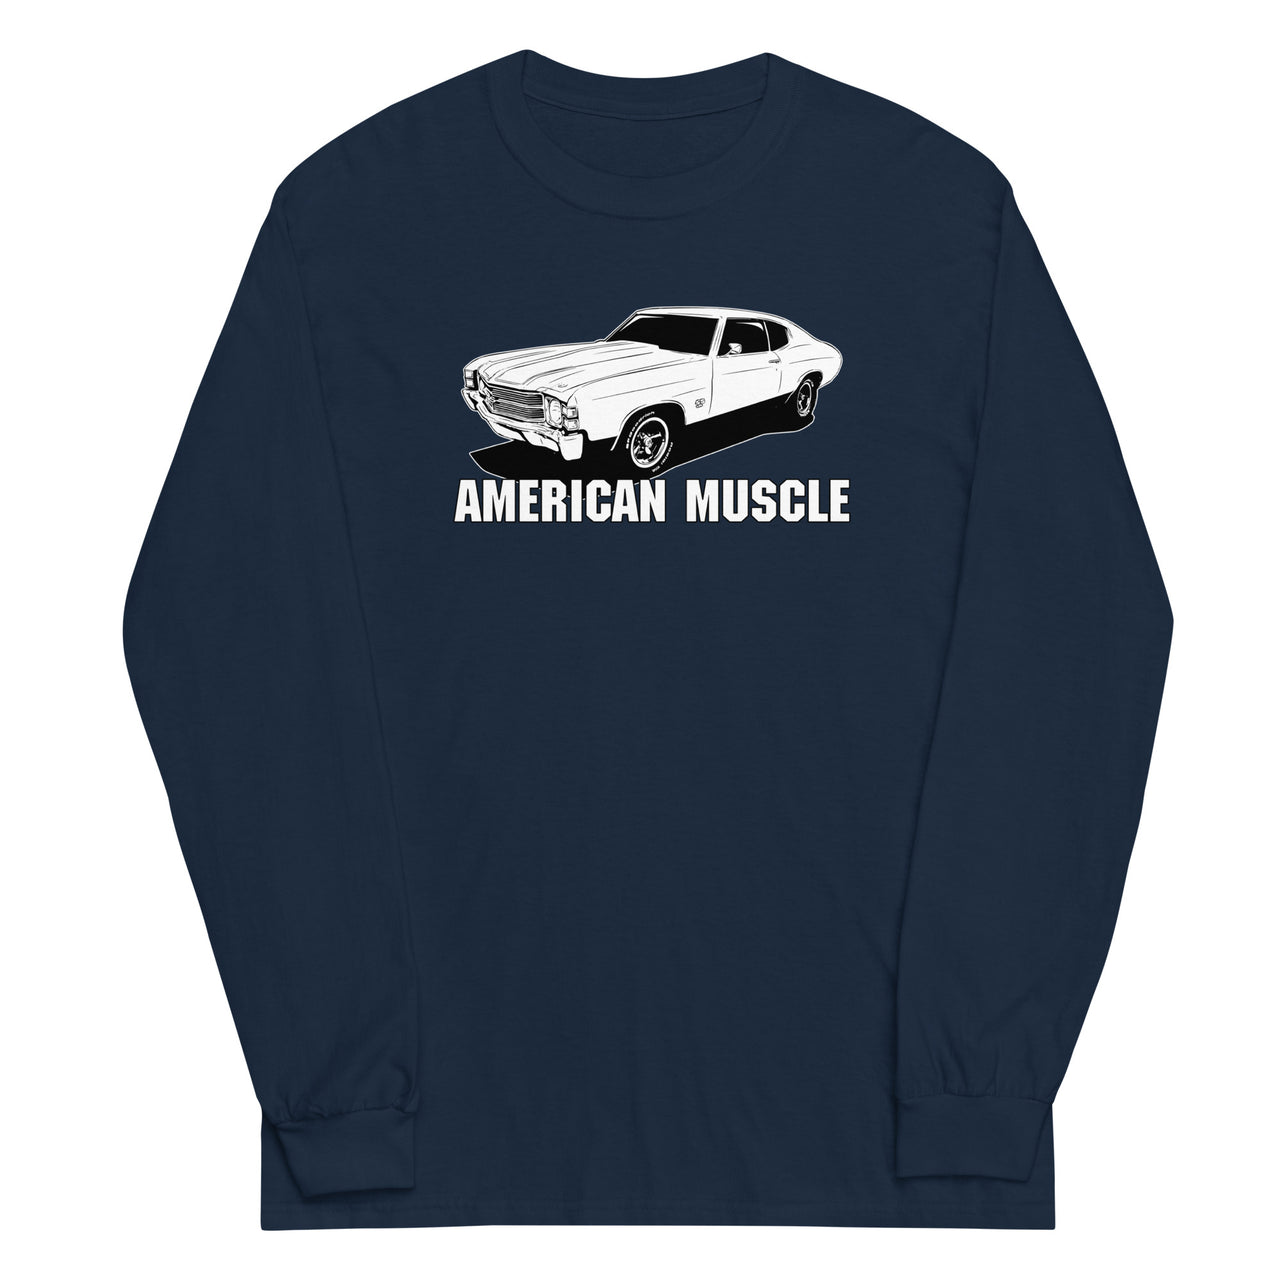 1971 Chevelle American Muscle Long Sleeve T-Shirt in navy